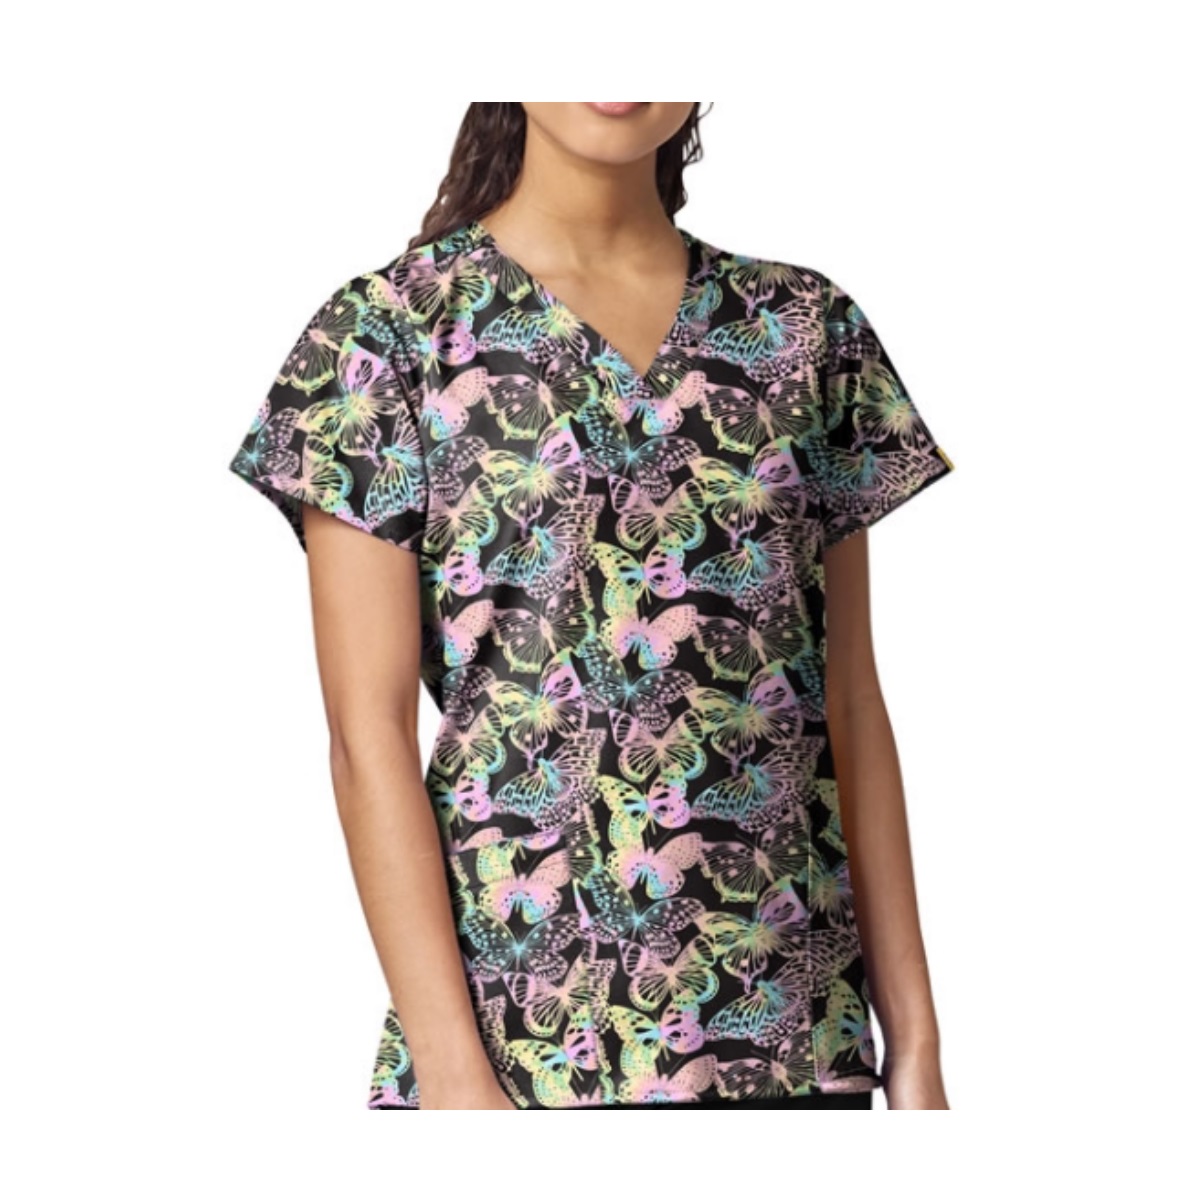 Wink Scrubs Women's Stretch Poly V-Neck Print Top Extended Sizes